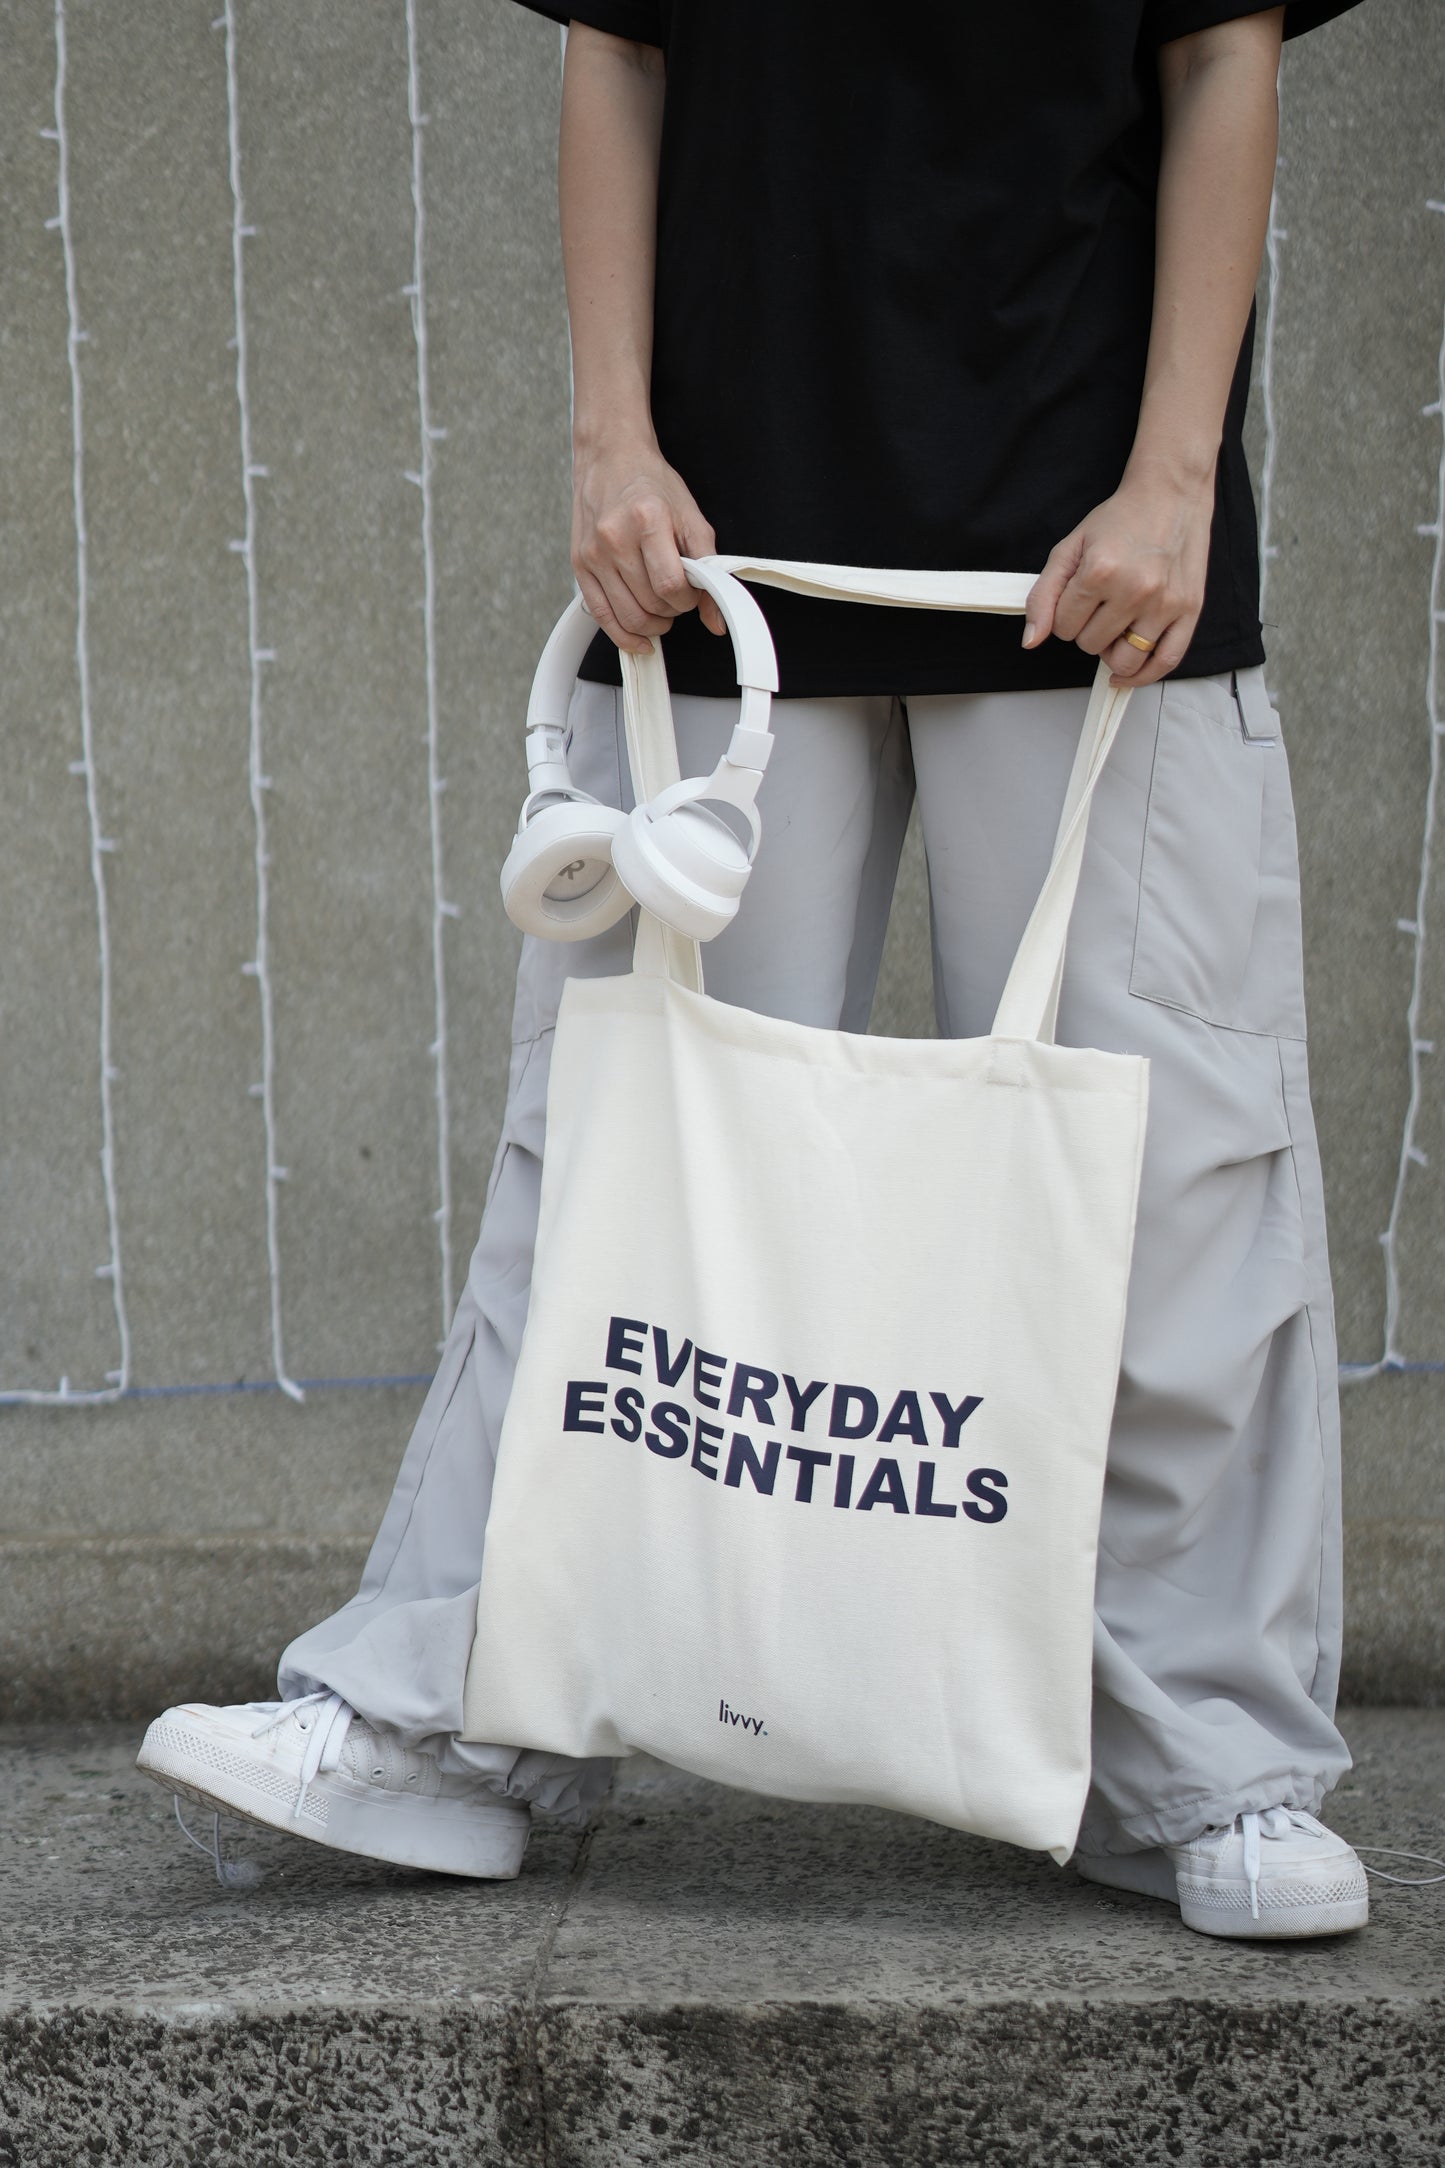 The Everyday Essentials Tote bag- USE CODE "BANK15" TO GET  15% OFF